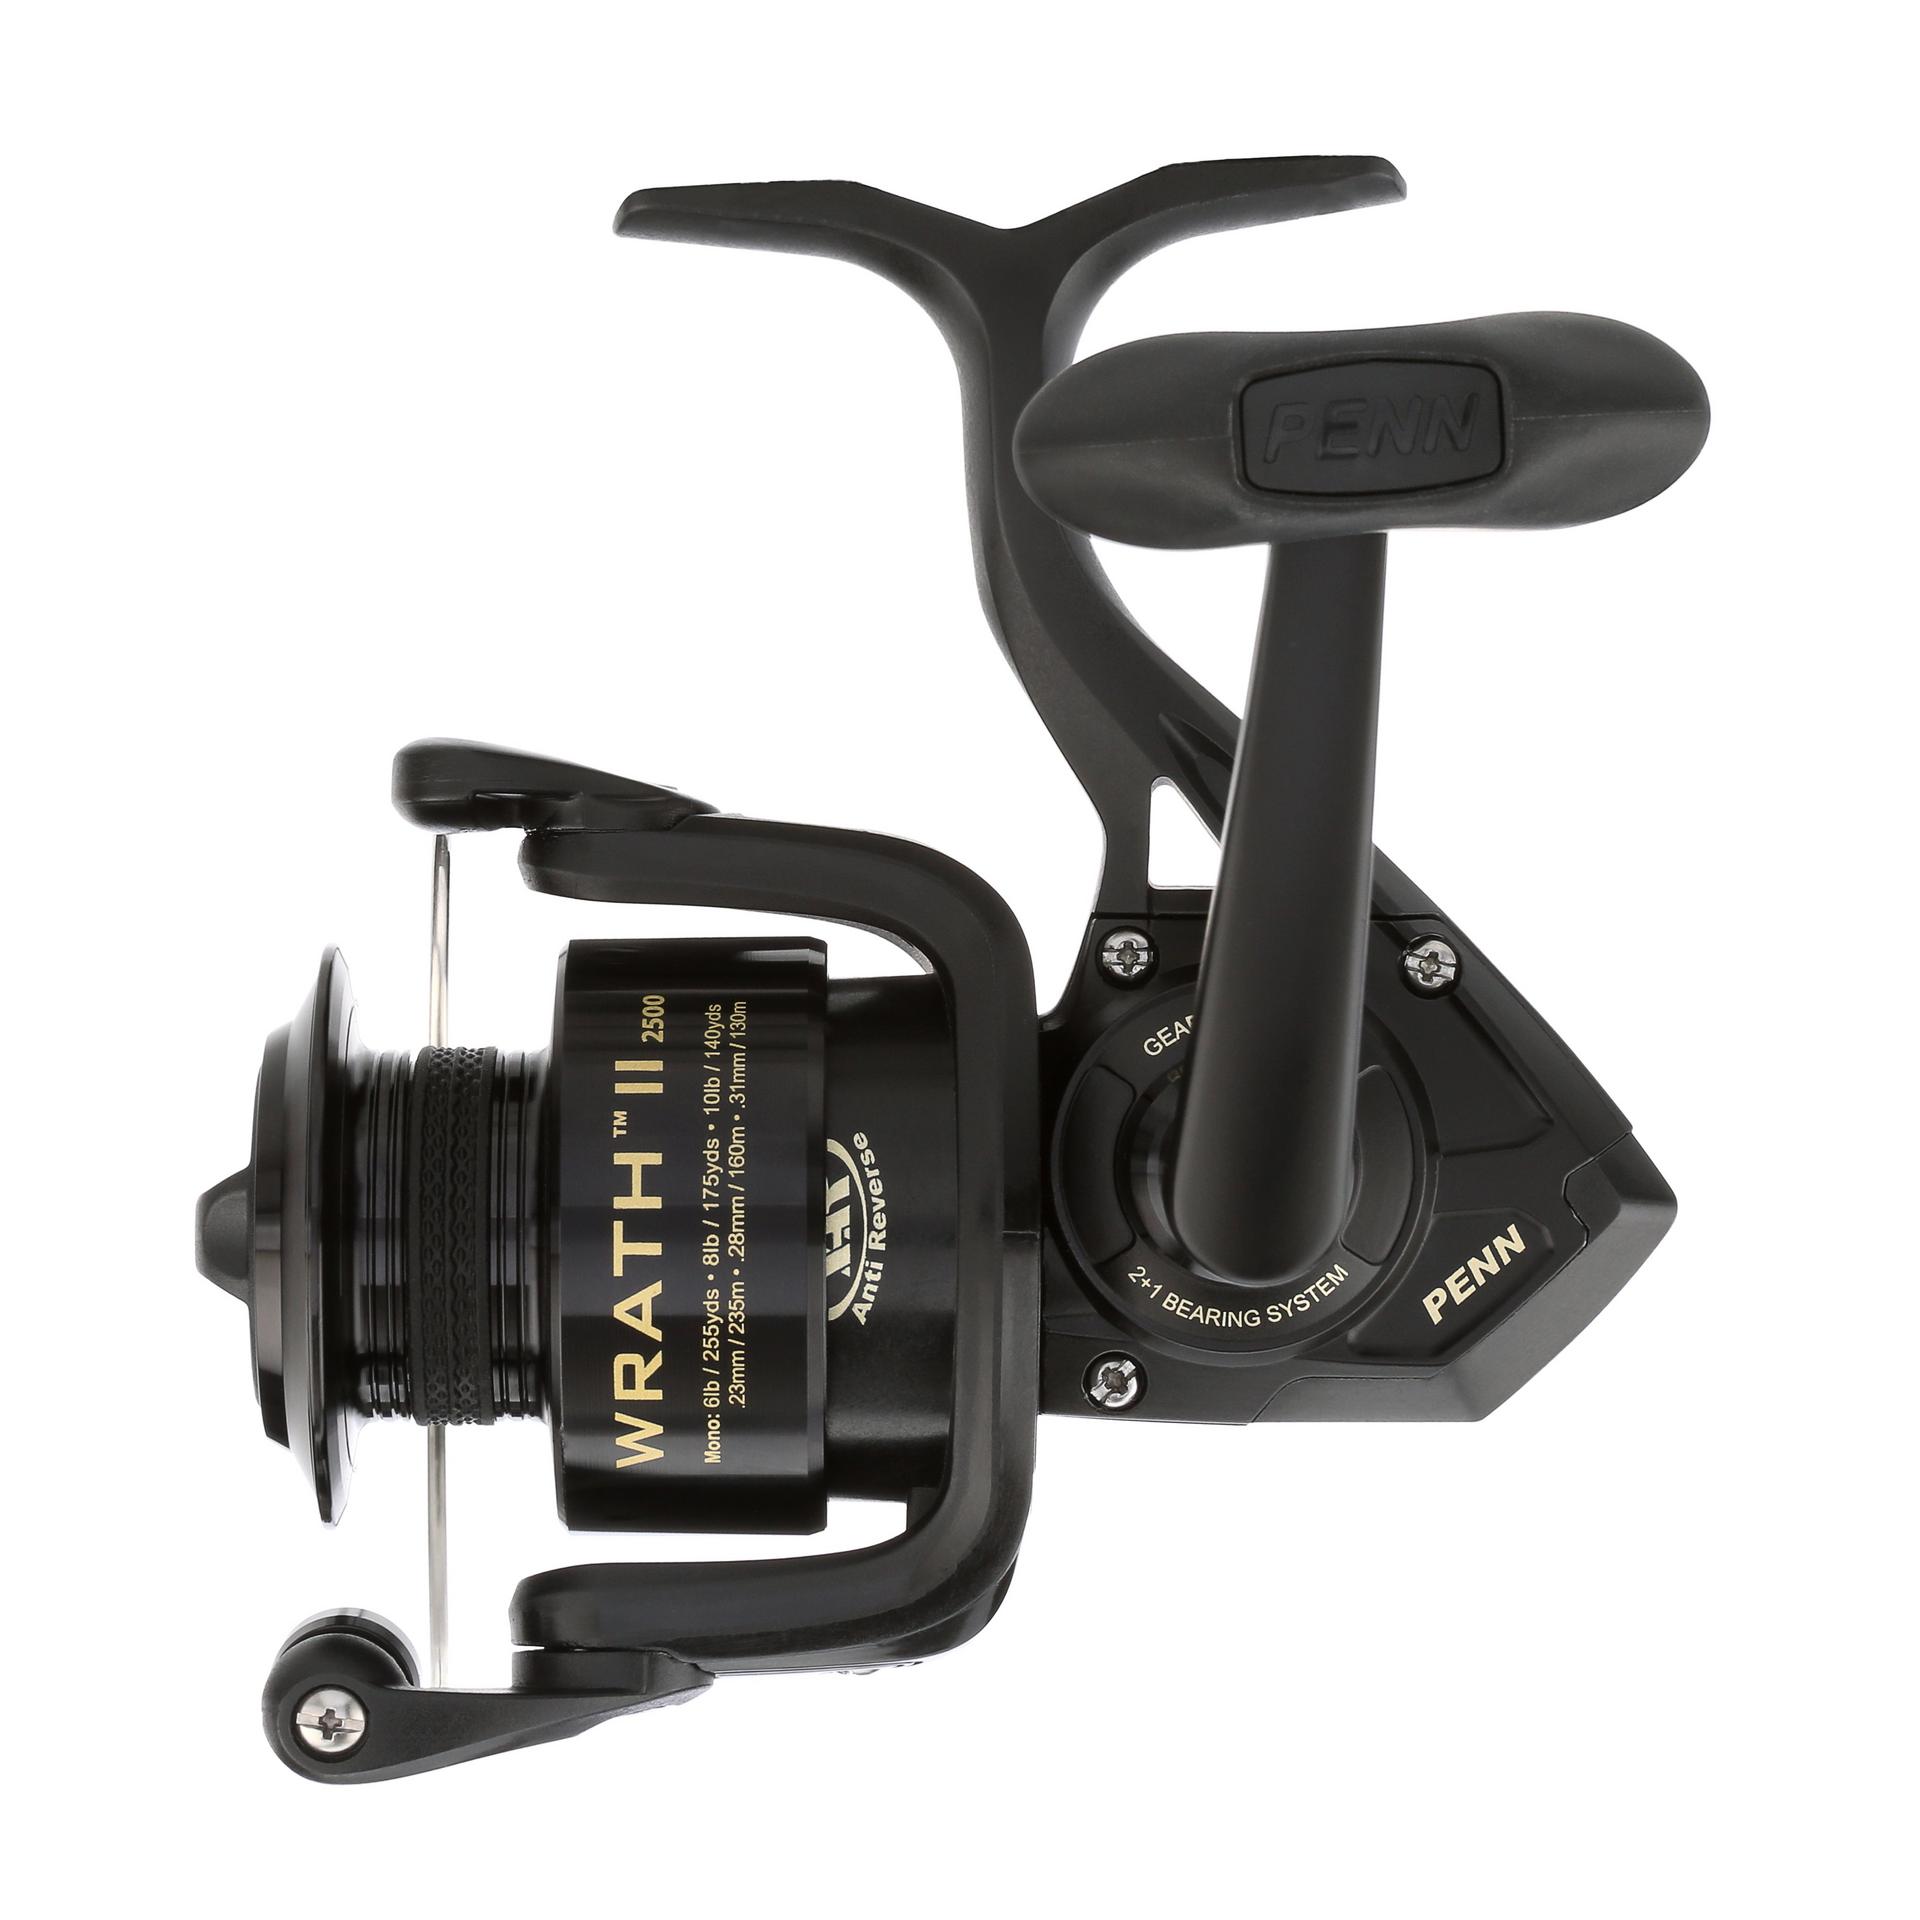 Penn Wrath 8000/ 10ft Combo. This Reel holds up to 300 yards of 80lb braid.  The rod is a heavy action. This combo is perfect for surf fishing  🎣🐟😎.